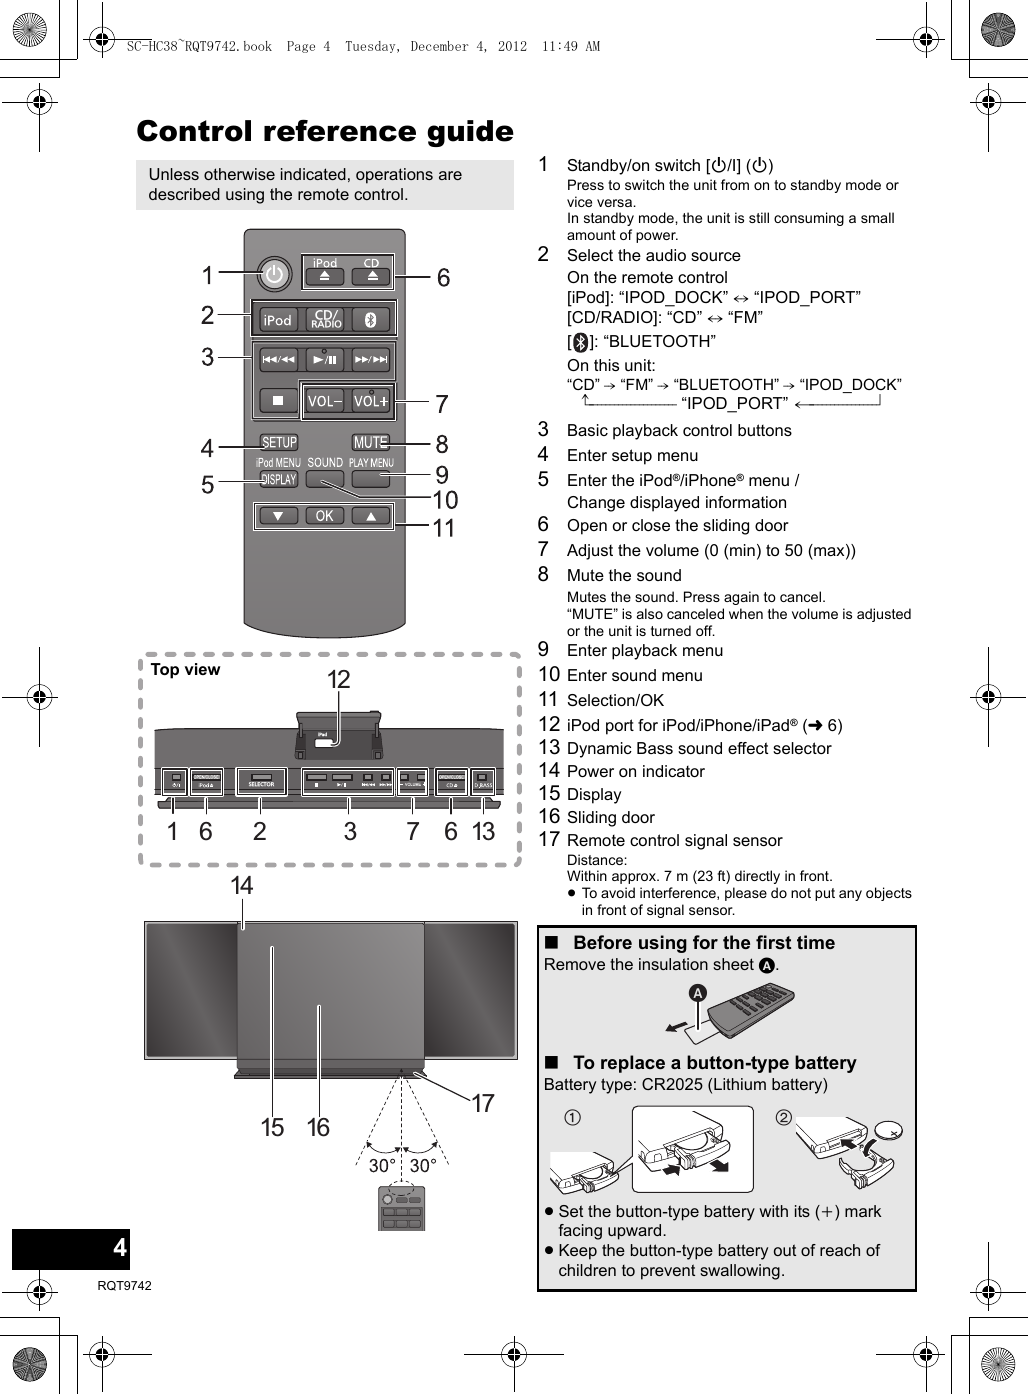 4RQT9742Control reference guide1Standby/on switch [Í/I] (Í)Press to switch the unit from on to standby mode or vice versa.In standby mode, the unit is still consuming a small amount of power.2Select the audio sourceOn the remote control[iPod]: “IPOD_DOCK” ,. “IPOD_PORT”[CD/RADIO]: “CD” ,. “FM”[]: “BLUETOOTH”On this unit:“CD” -. “FM” -. “BLUETOOTH” -. “IPOD_DOCK”^--------------------- “IPOD_PORT” (----------------b3Basic playback control buttons4Enter setup menu5Enter the iPod®/iPhone® menu / Change displayed information6Open or close the sliding door7Adjust the volume (0 (min) to 50 (max))8Mute the soundMutes the sound. Press again to cancel. “MUTE” is also canceled when the volume is adjusted or the unit is turned off.9Enter playback menu10 Enter sound menu11 Selection/OK 12 iPod port for iPod/iPhone/iPad® (l6)13 Dynamic Bass sound effect selector14 Power on indicator15 Display16 Sliding door17 Remote control signal sensorDistance:Within approx. 7 m (23 ft) directly in front.≥To avoid interference, please do not put any objects in front of signal sensor.Unless otherwise indicated, operations are described using the remote control.SELECTORiPad12136732161415 16 17CD/RADIOTop view∫Before using for the first timeRemove the insulation sheet A.∫To replace a button-type batteryBattery type: CR2025 (Lithium battery)≥Set the button-type battery with its (i) mark facing upward.≥Keep the button-type battery out of reach of children to prevent swallowing.SC-HC38~RQT9742.book  Page 4  Tuesday, December 4, 2012  11:49 AM